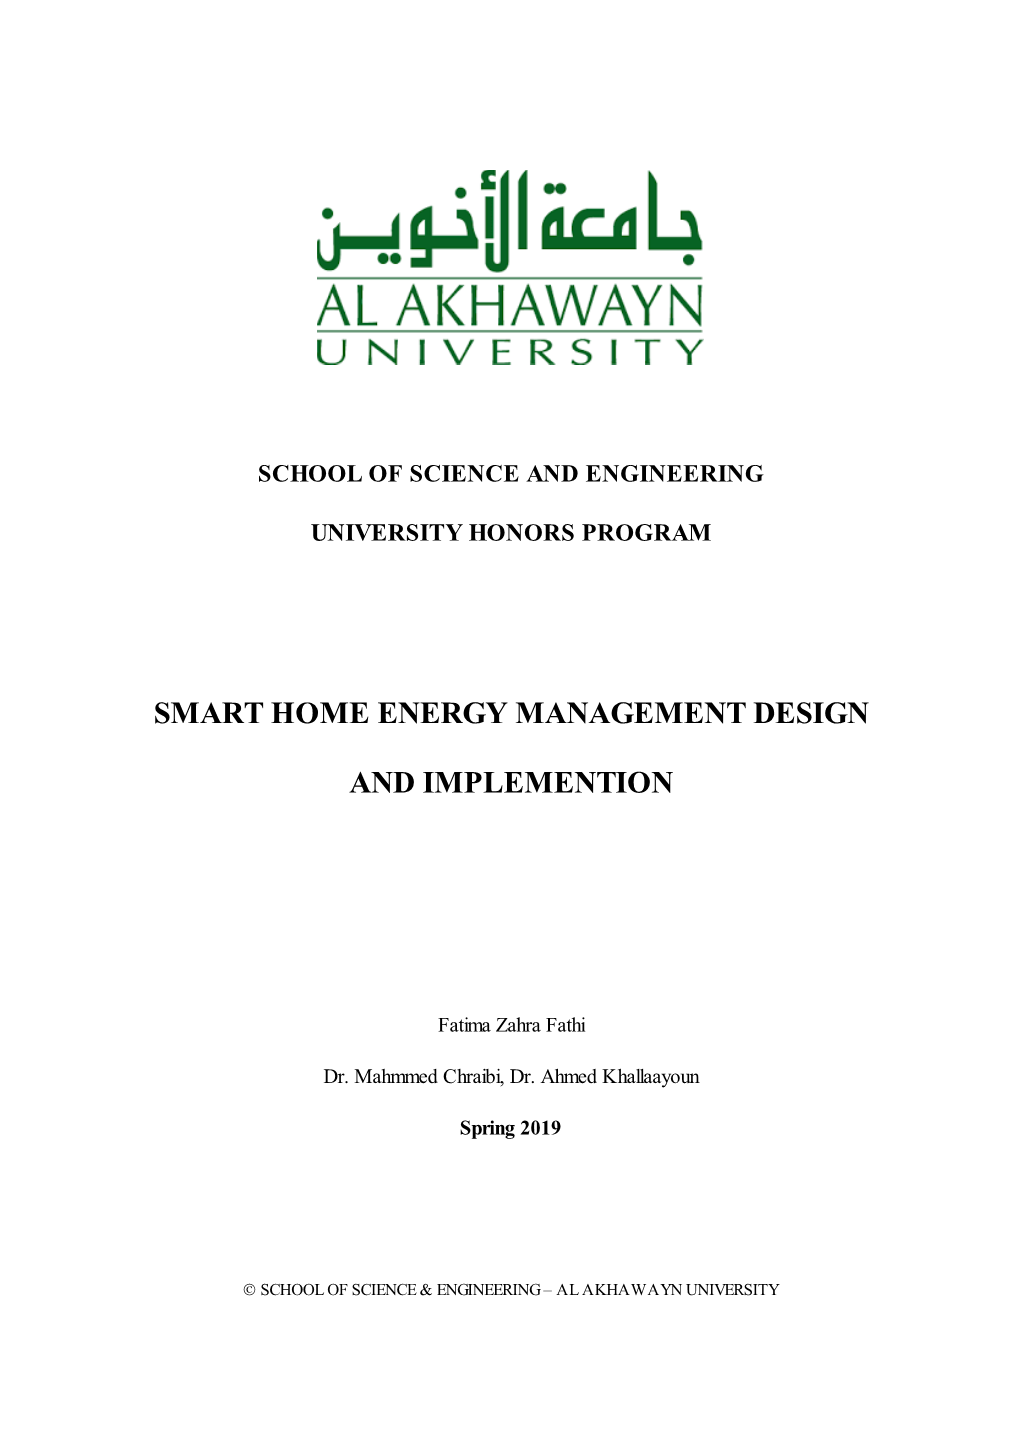 Smart Home Energy Management Design and Implemention